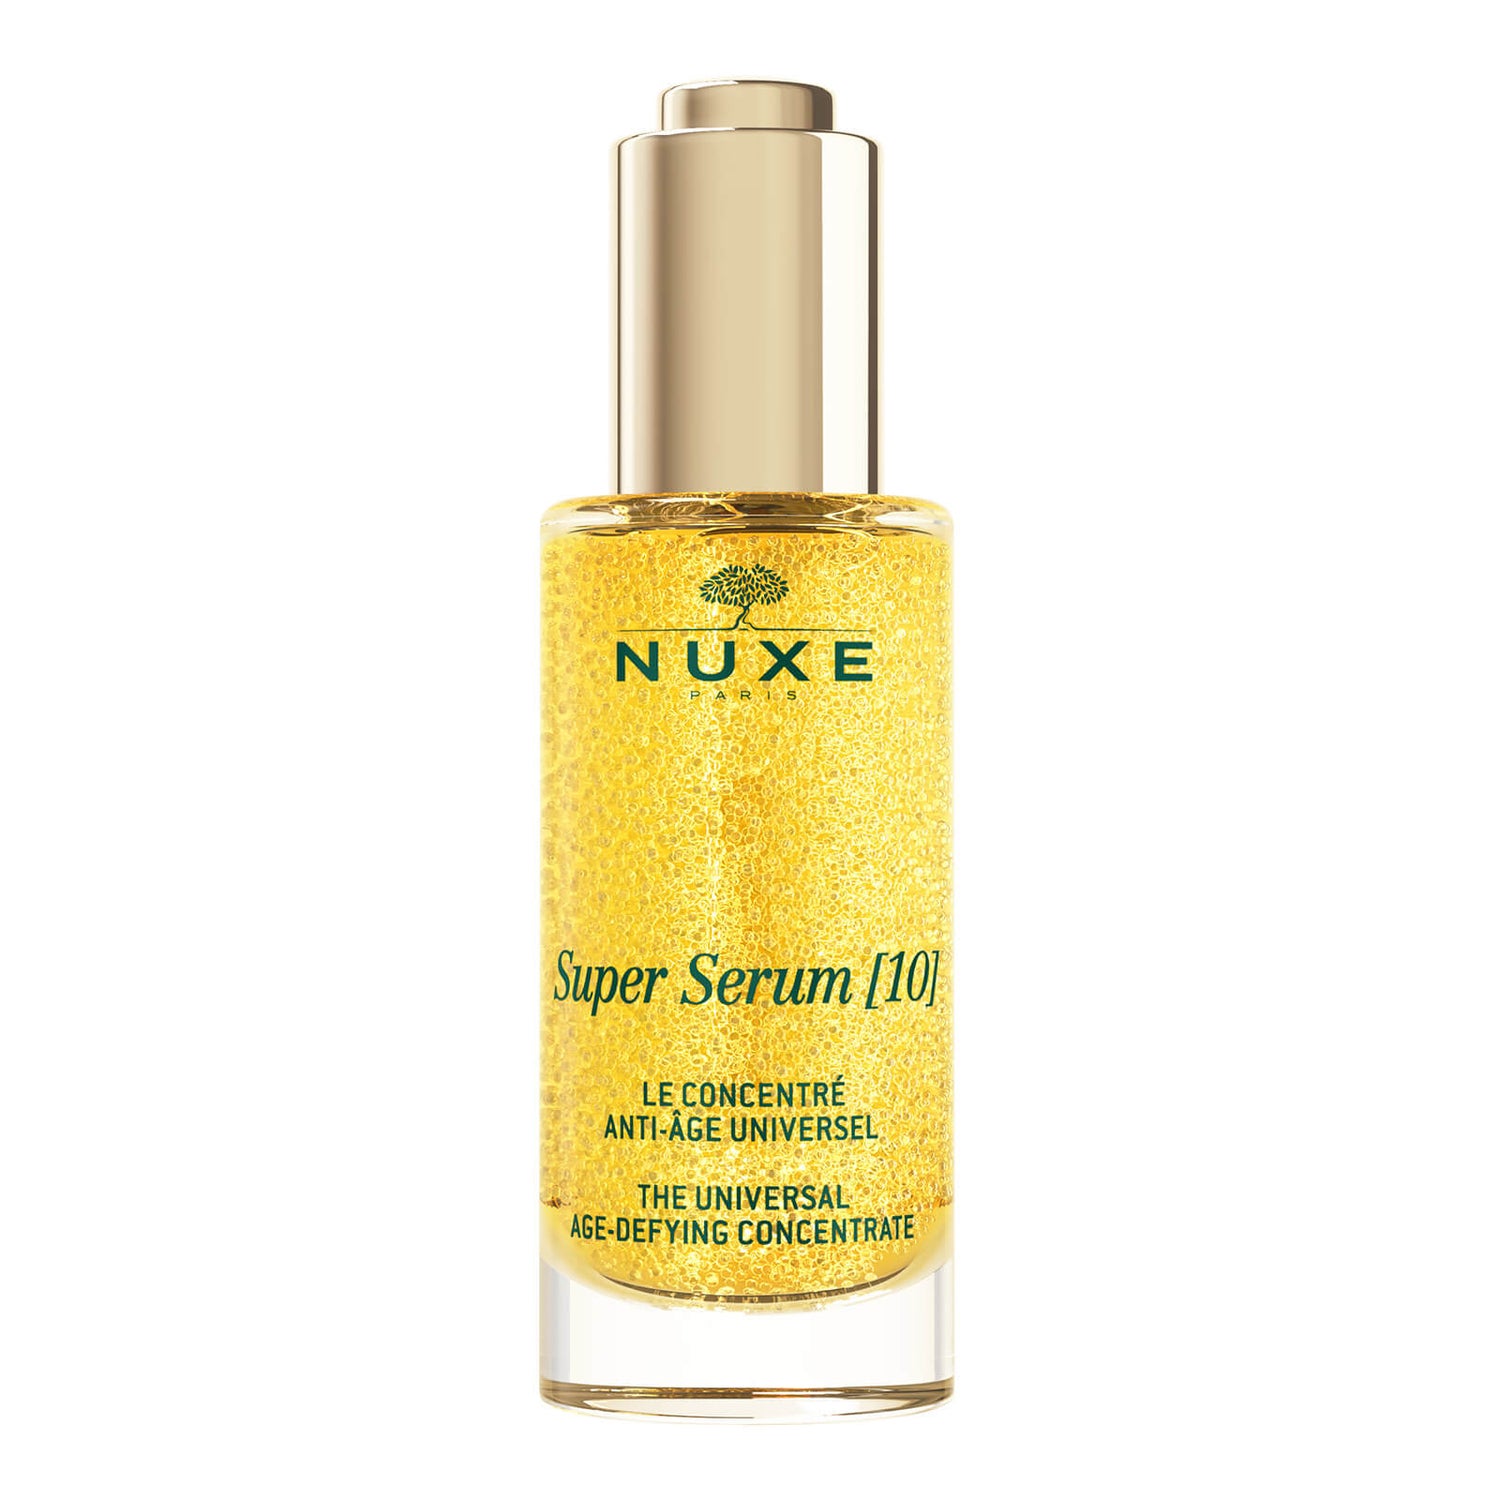 Super Serum [10] -The universal anti-aging concentrate